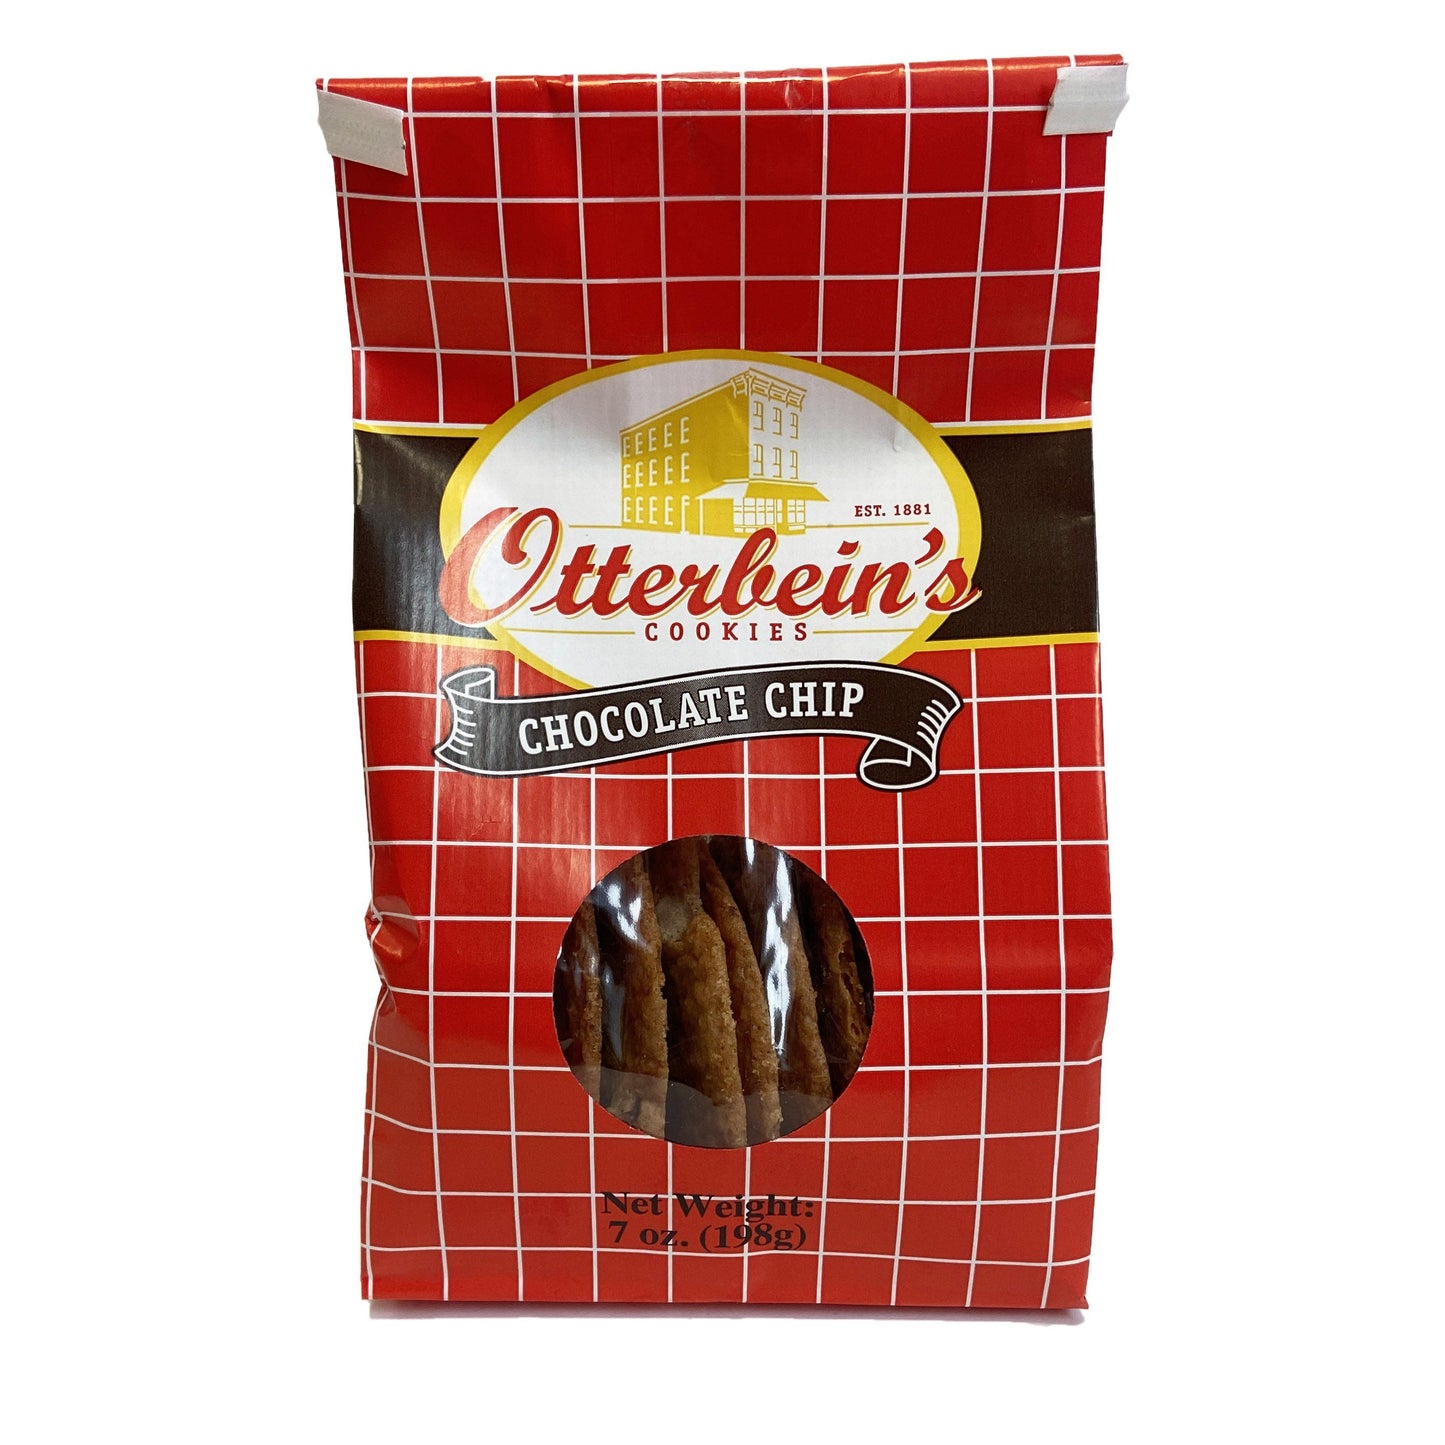 Otterbein's Chocolate Chip (7 oz) / Cookies - Route One Apparel